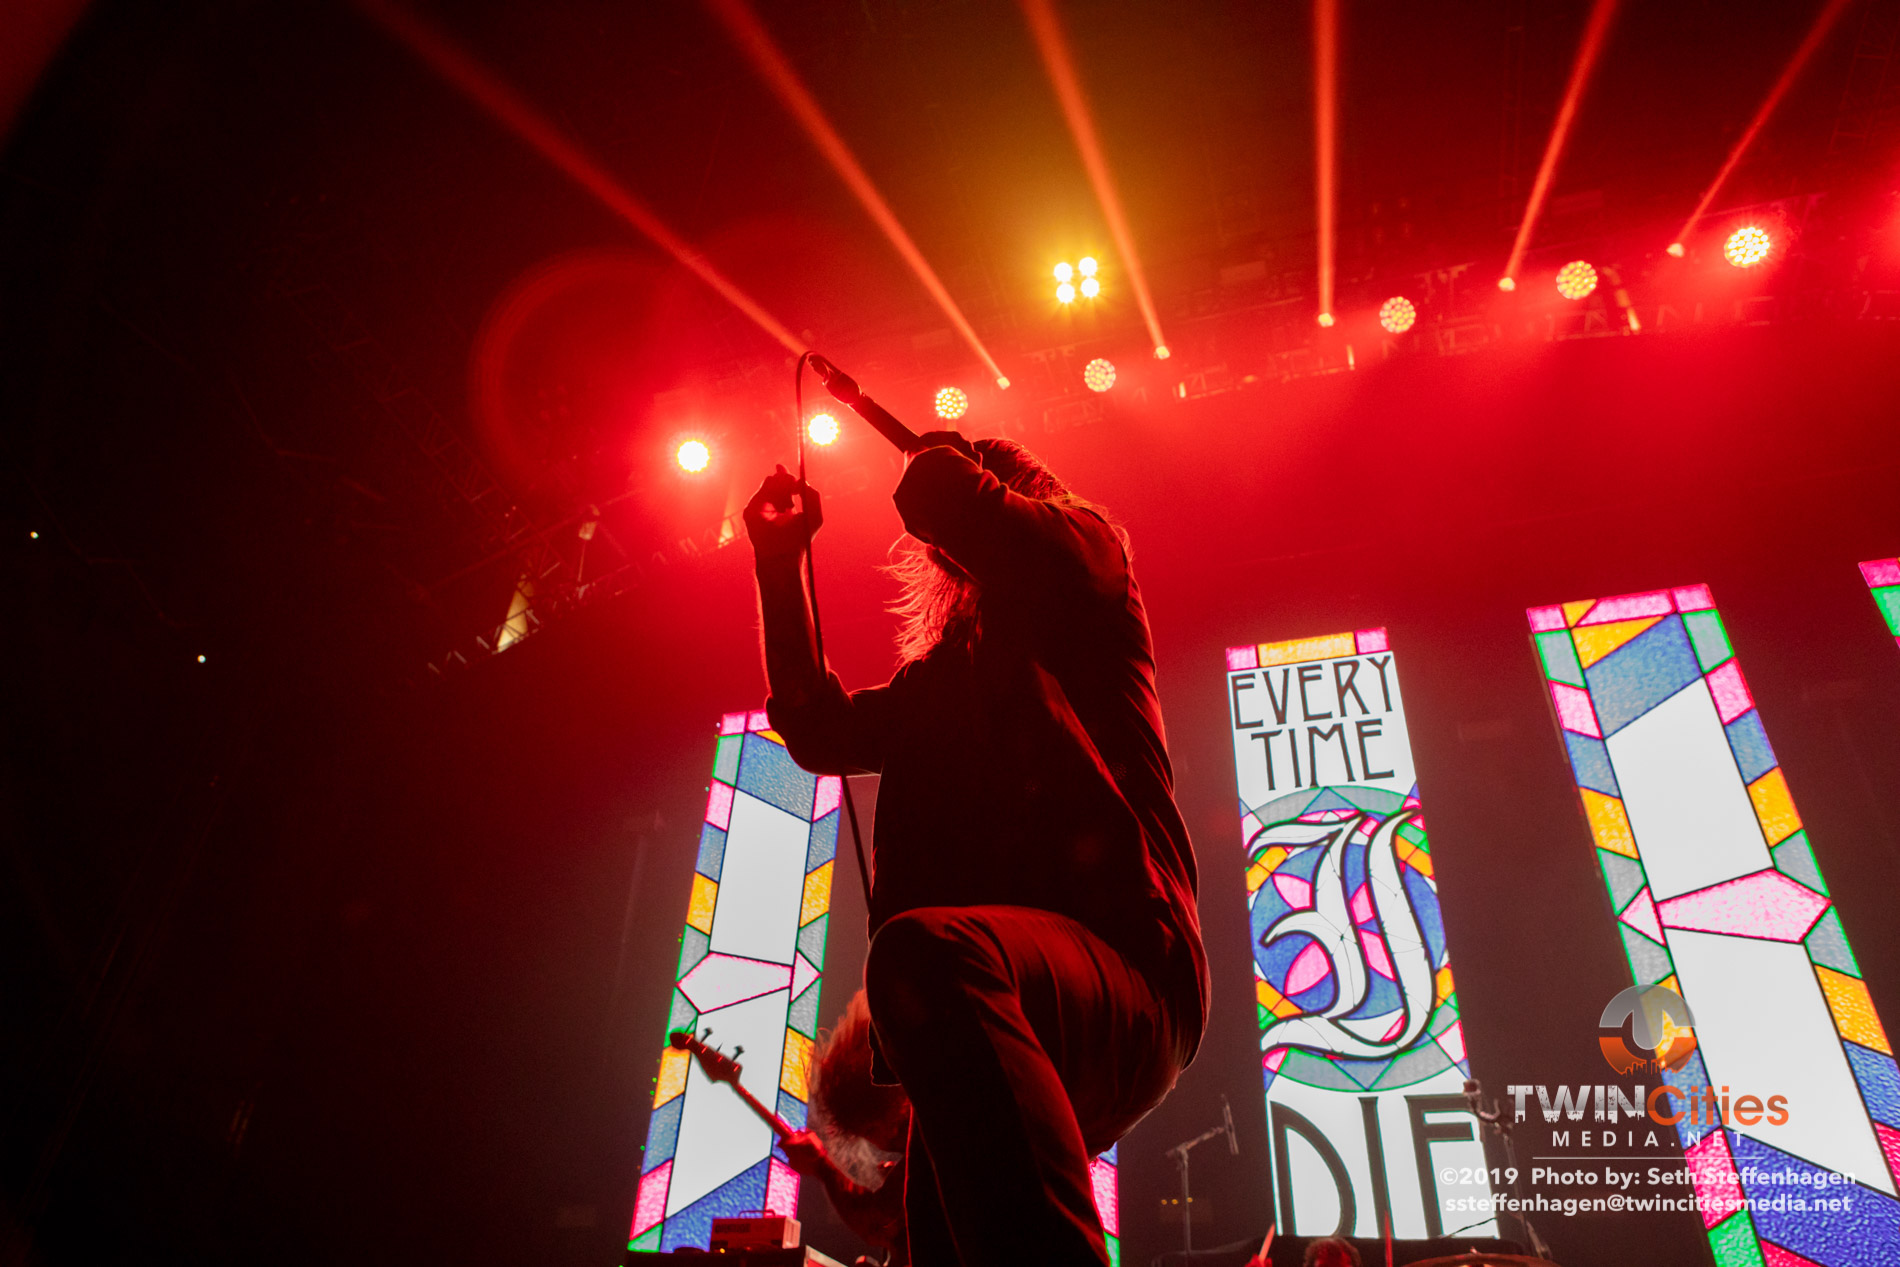 June 15, 2019 - Minneapolis, Minnesota, United States -  Every Time I Die live in concert at The Armory opening for Mastodon and Coheed & Cambria.

(Photo by Seth Steffenhagen/Steffenhagen Photography)